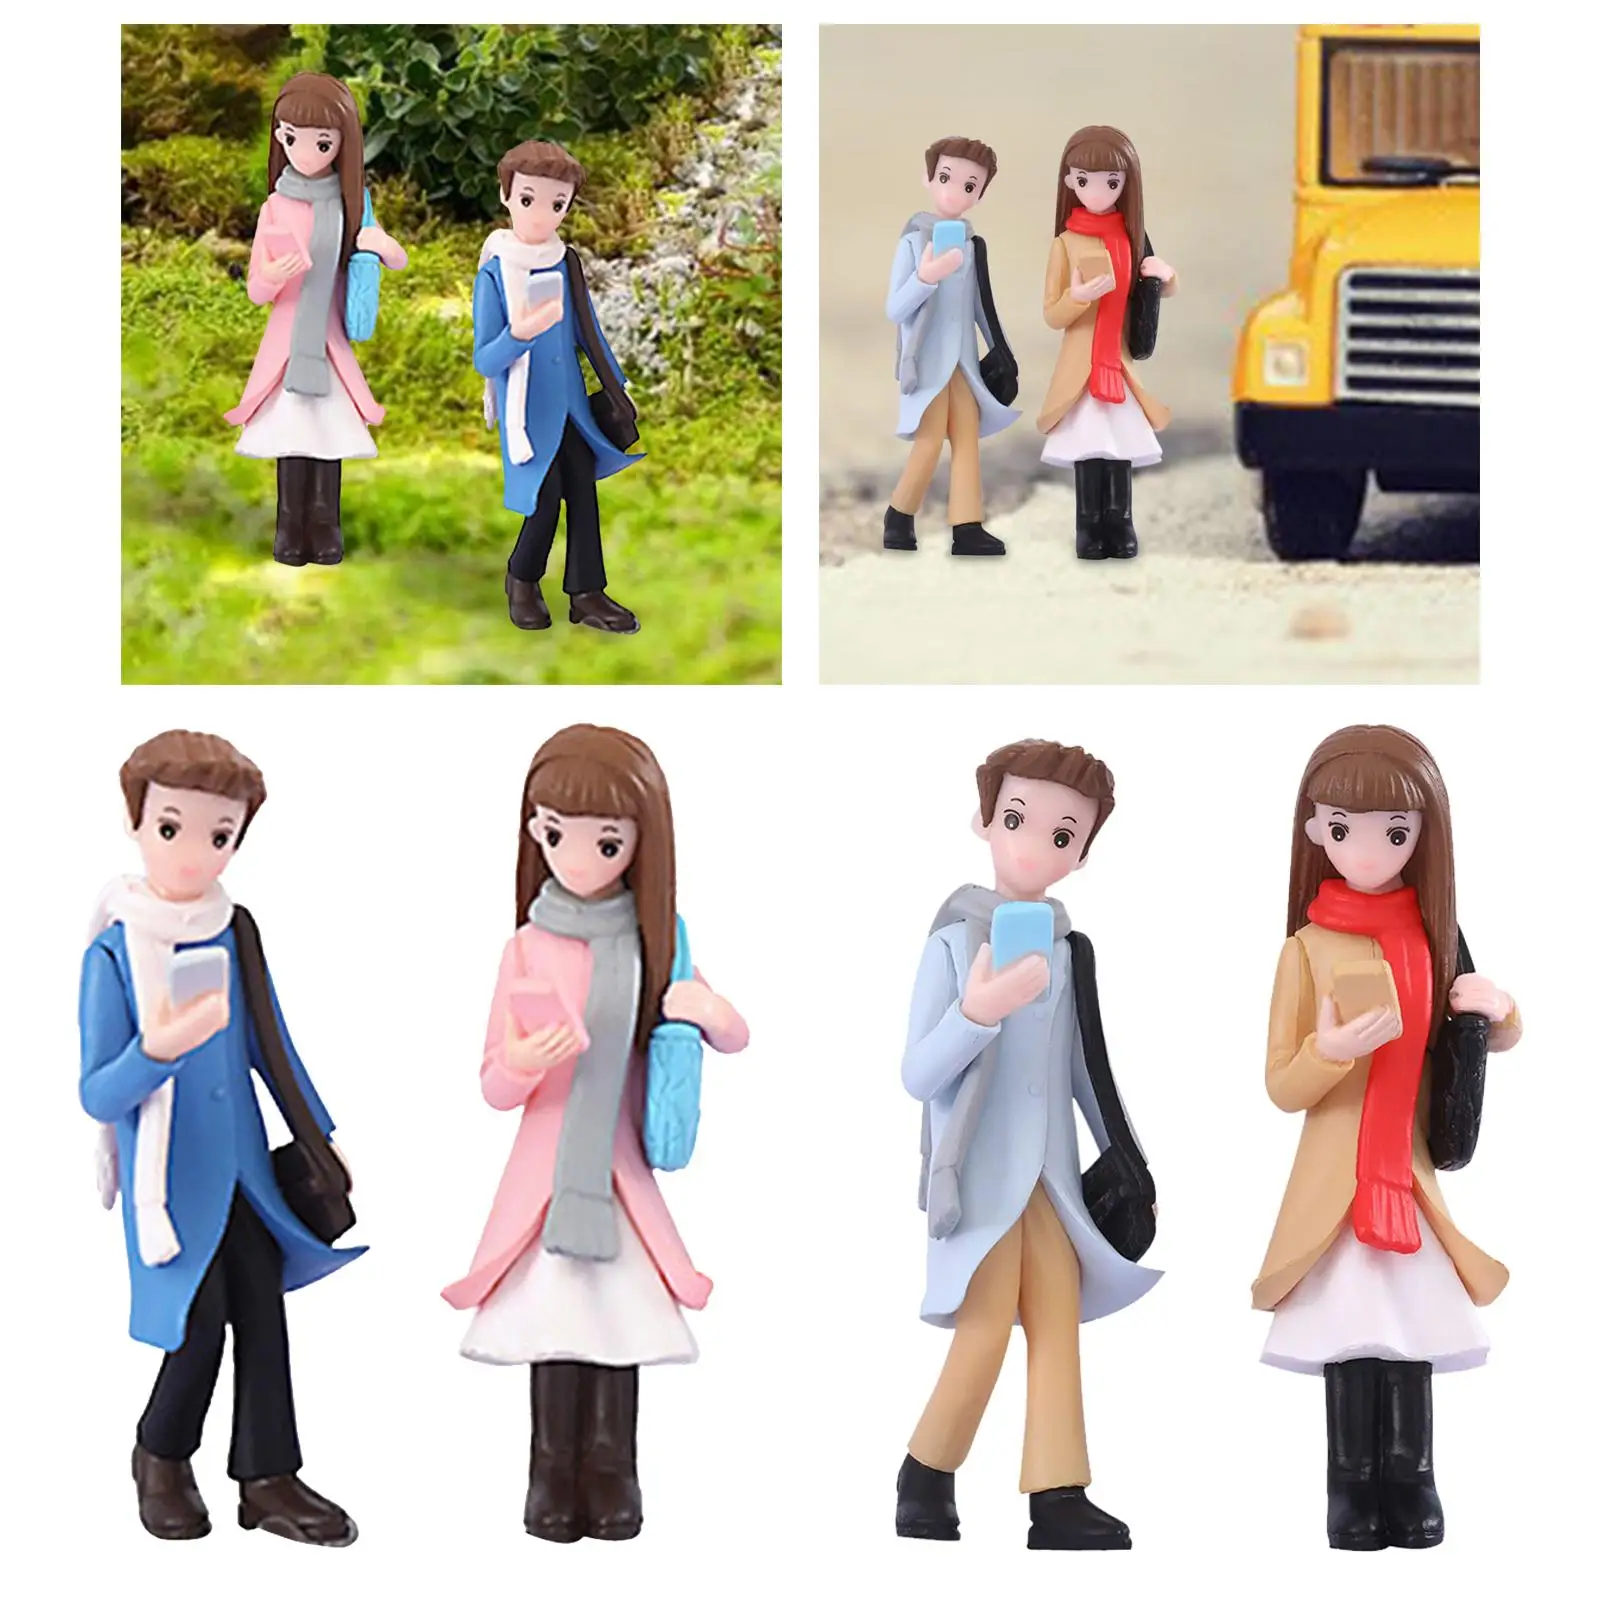 Phone Couple Tiny Hand Painted Standing Model Trains People Figures for Diorama Photography Props Micro Landscapes Decoration